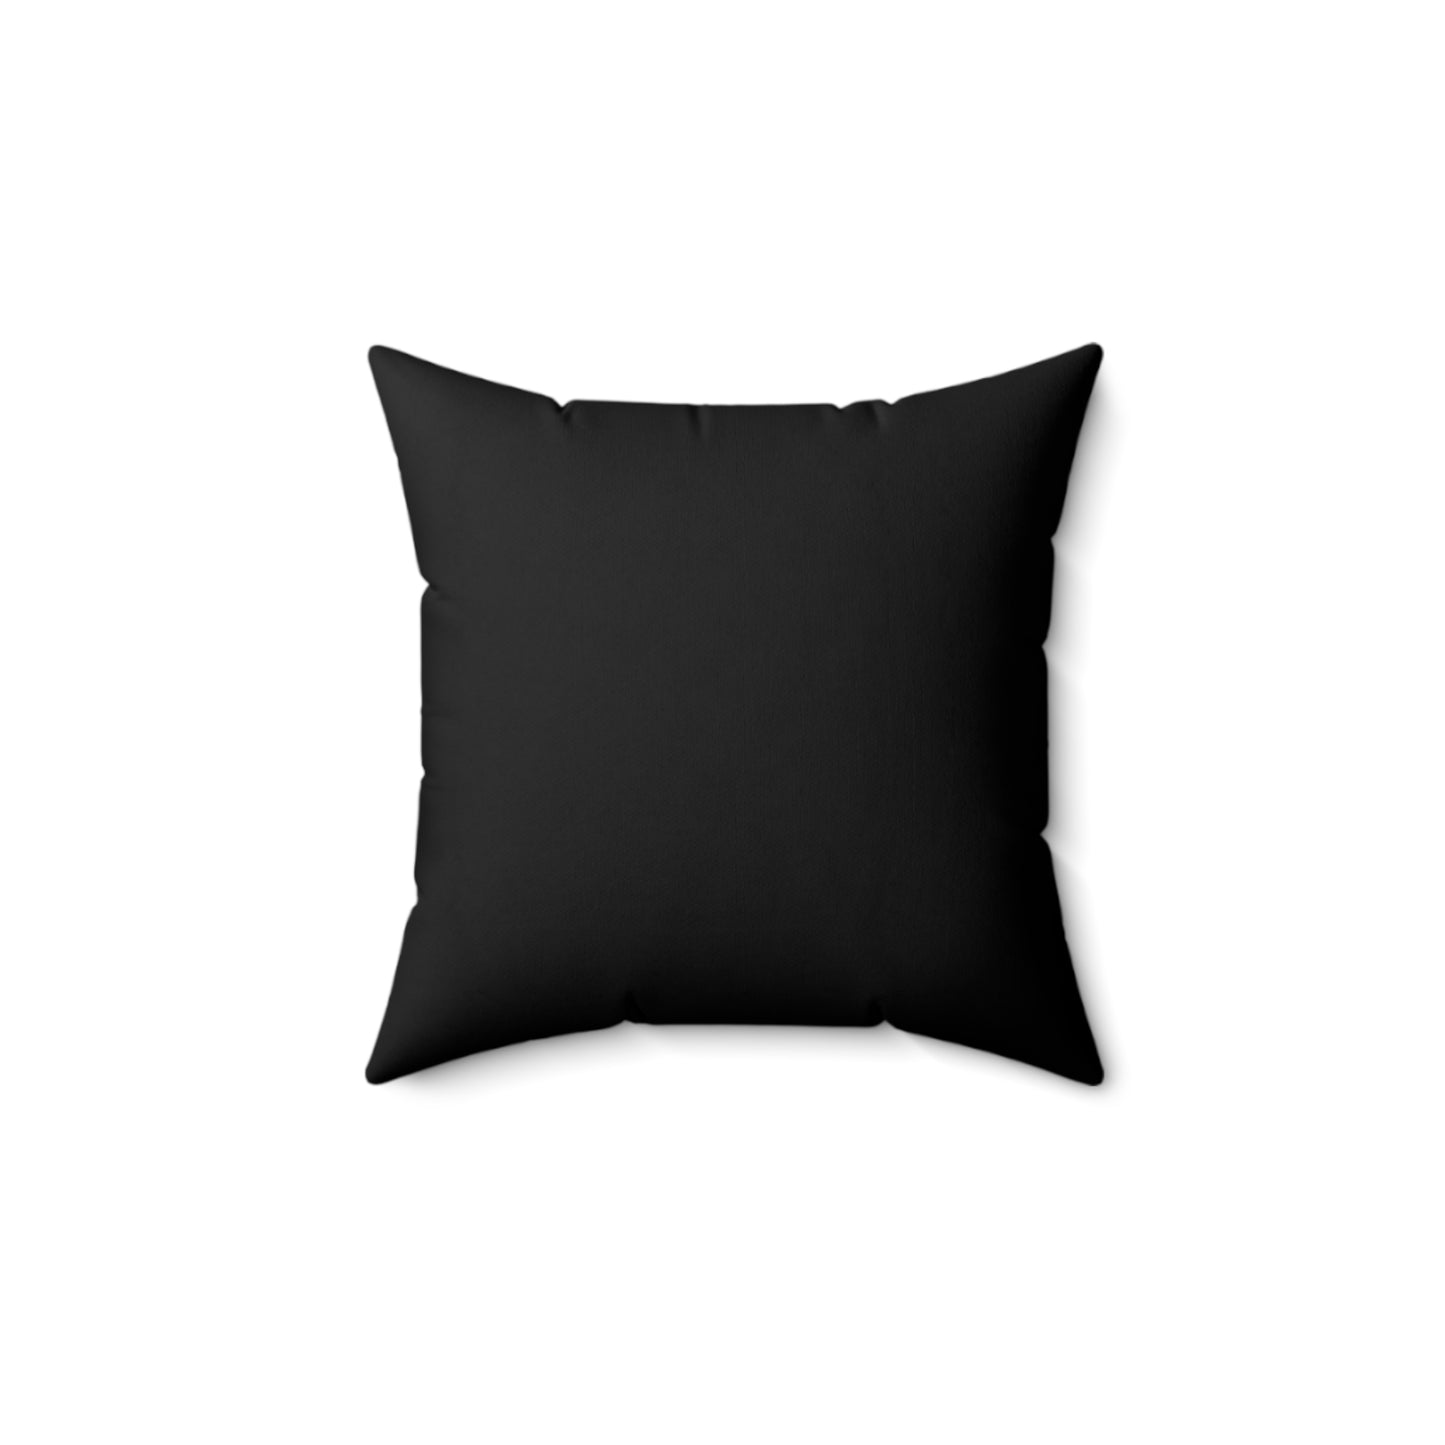 No Greater Love Do I Know But The Love Of God  Pillow